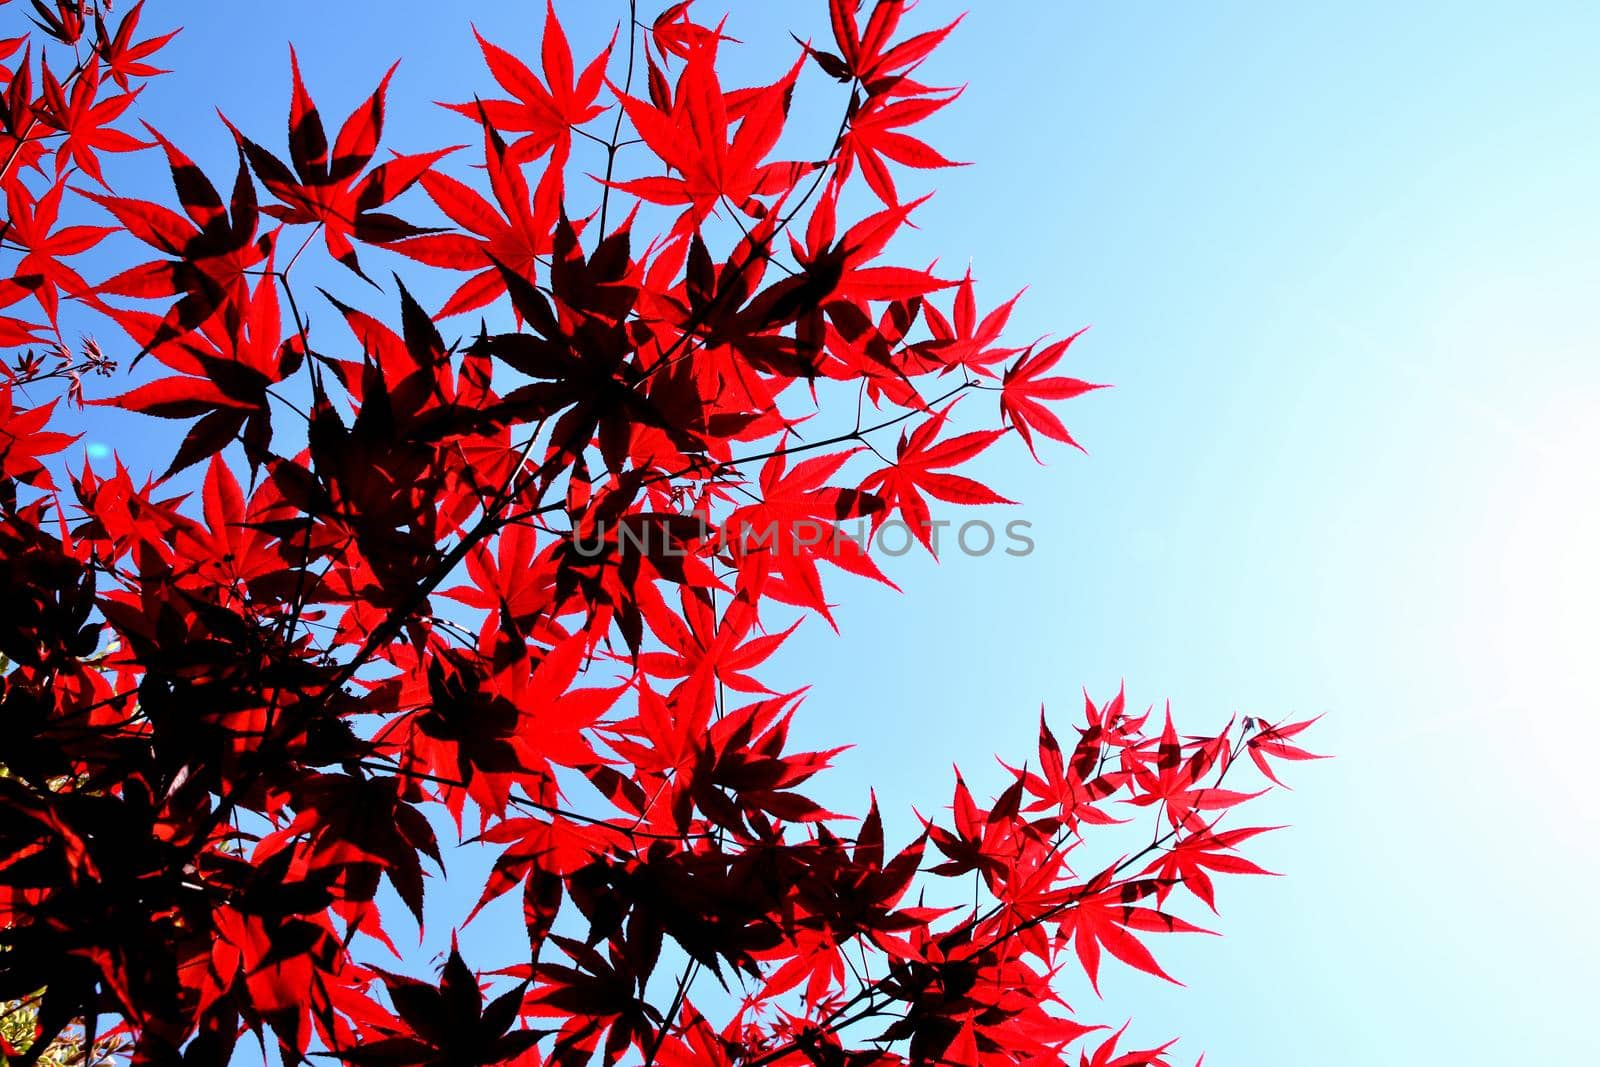 Closeup of the red leaves of a freshly sprouted Japanese acer palmatum, illuminated by the spring sun